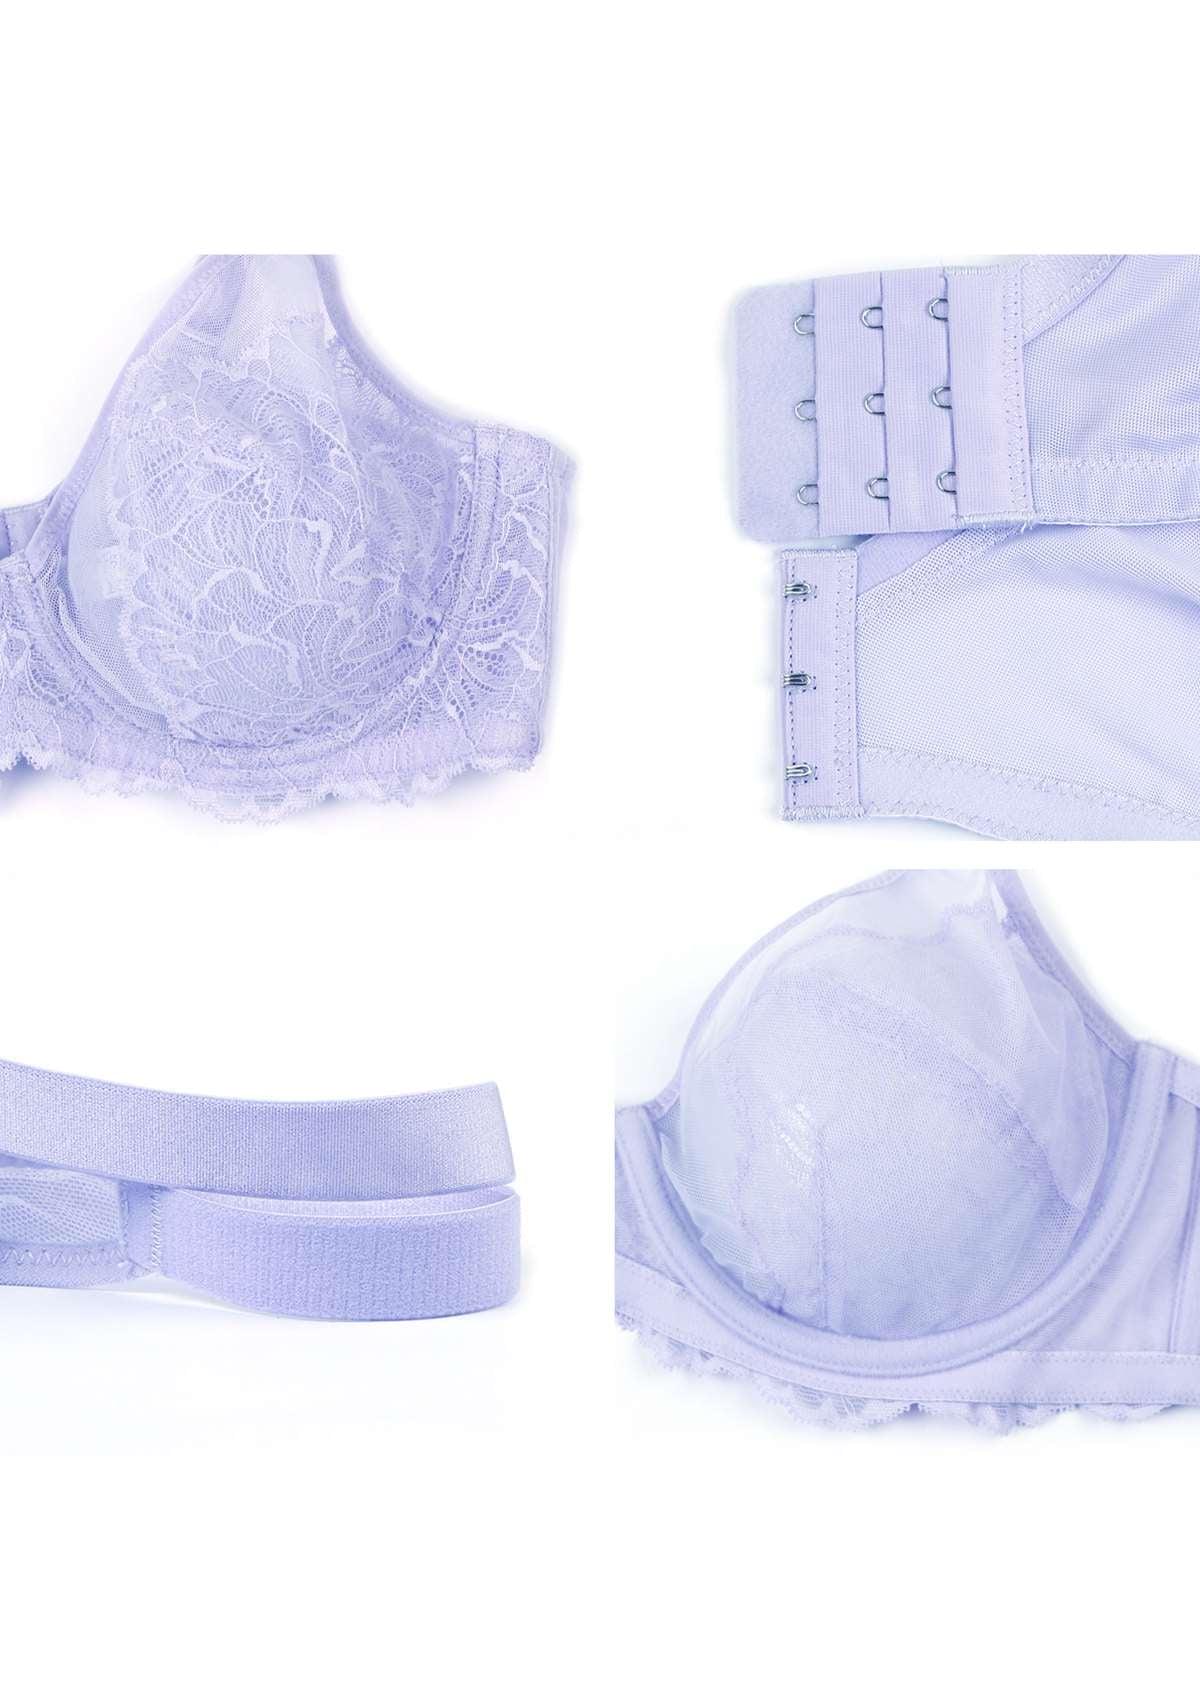 HSIA Blossom Transparent Lace Bra: Plus Size Wired Back Smoothing Bra - Light Purple / 40 / I